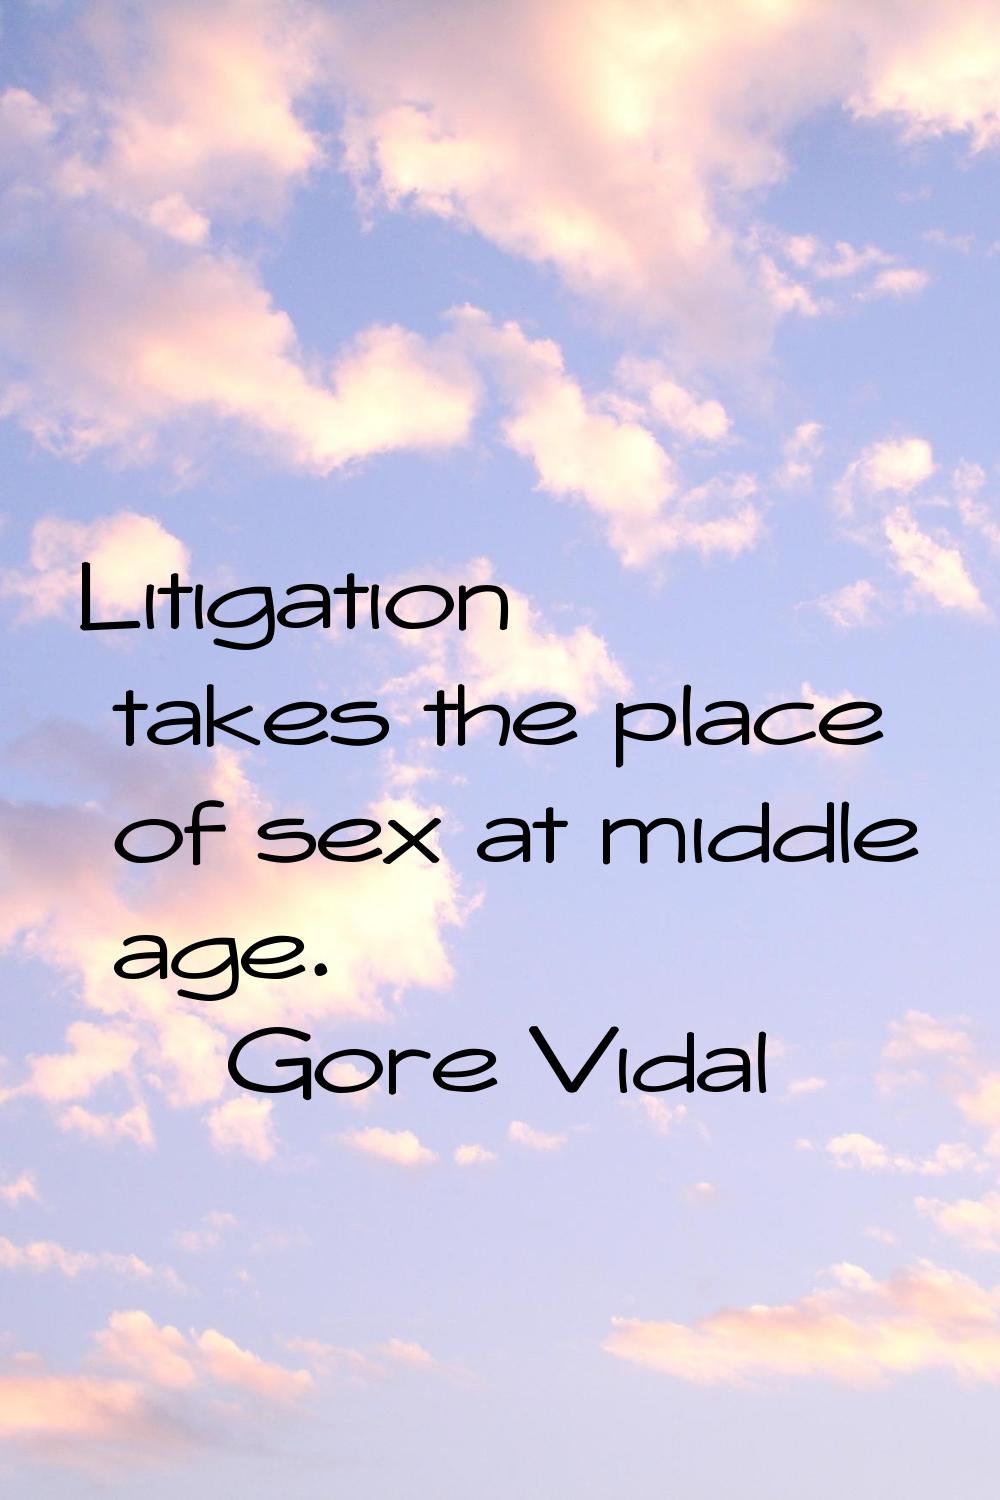 Litigation takes the place of sex at middle age.